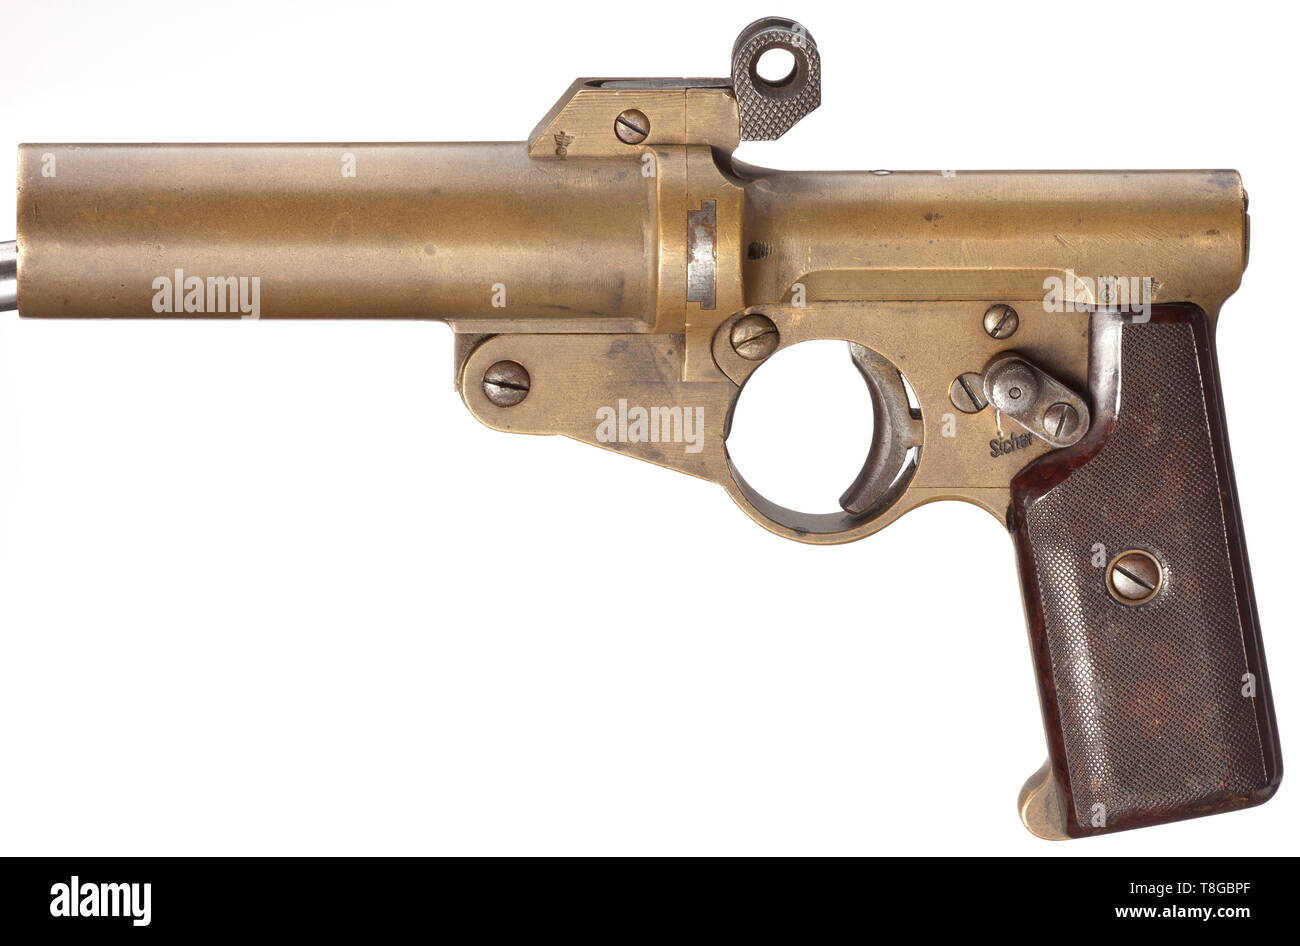 A single-barrelled signal pistol mod. A.W.W, Third Reich, navy Cal. 4, no. 614. Matching numbers. Drop barrel with snapper lock, length 112 mm. Total length 210 mm. Weight 905 g. Interior hammer. Safety. Signal pin. Construction attributed to Artilleriewerkstätten Wilhelmshaven. Slightly modified model. On left side of barrel latch and at rear of bolt housing navy acceptance marks eagle/swastika, 'M' missing. No further stamps or inscriptions. Brass grip frame and barrel. Smooth trigger, modified opening lever, breech-block, modified safety, mechanical parts and screws made, Editorial-Use-Only Stock Photo